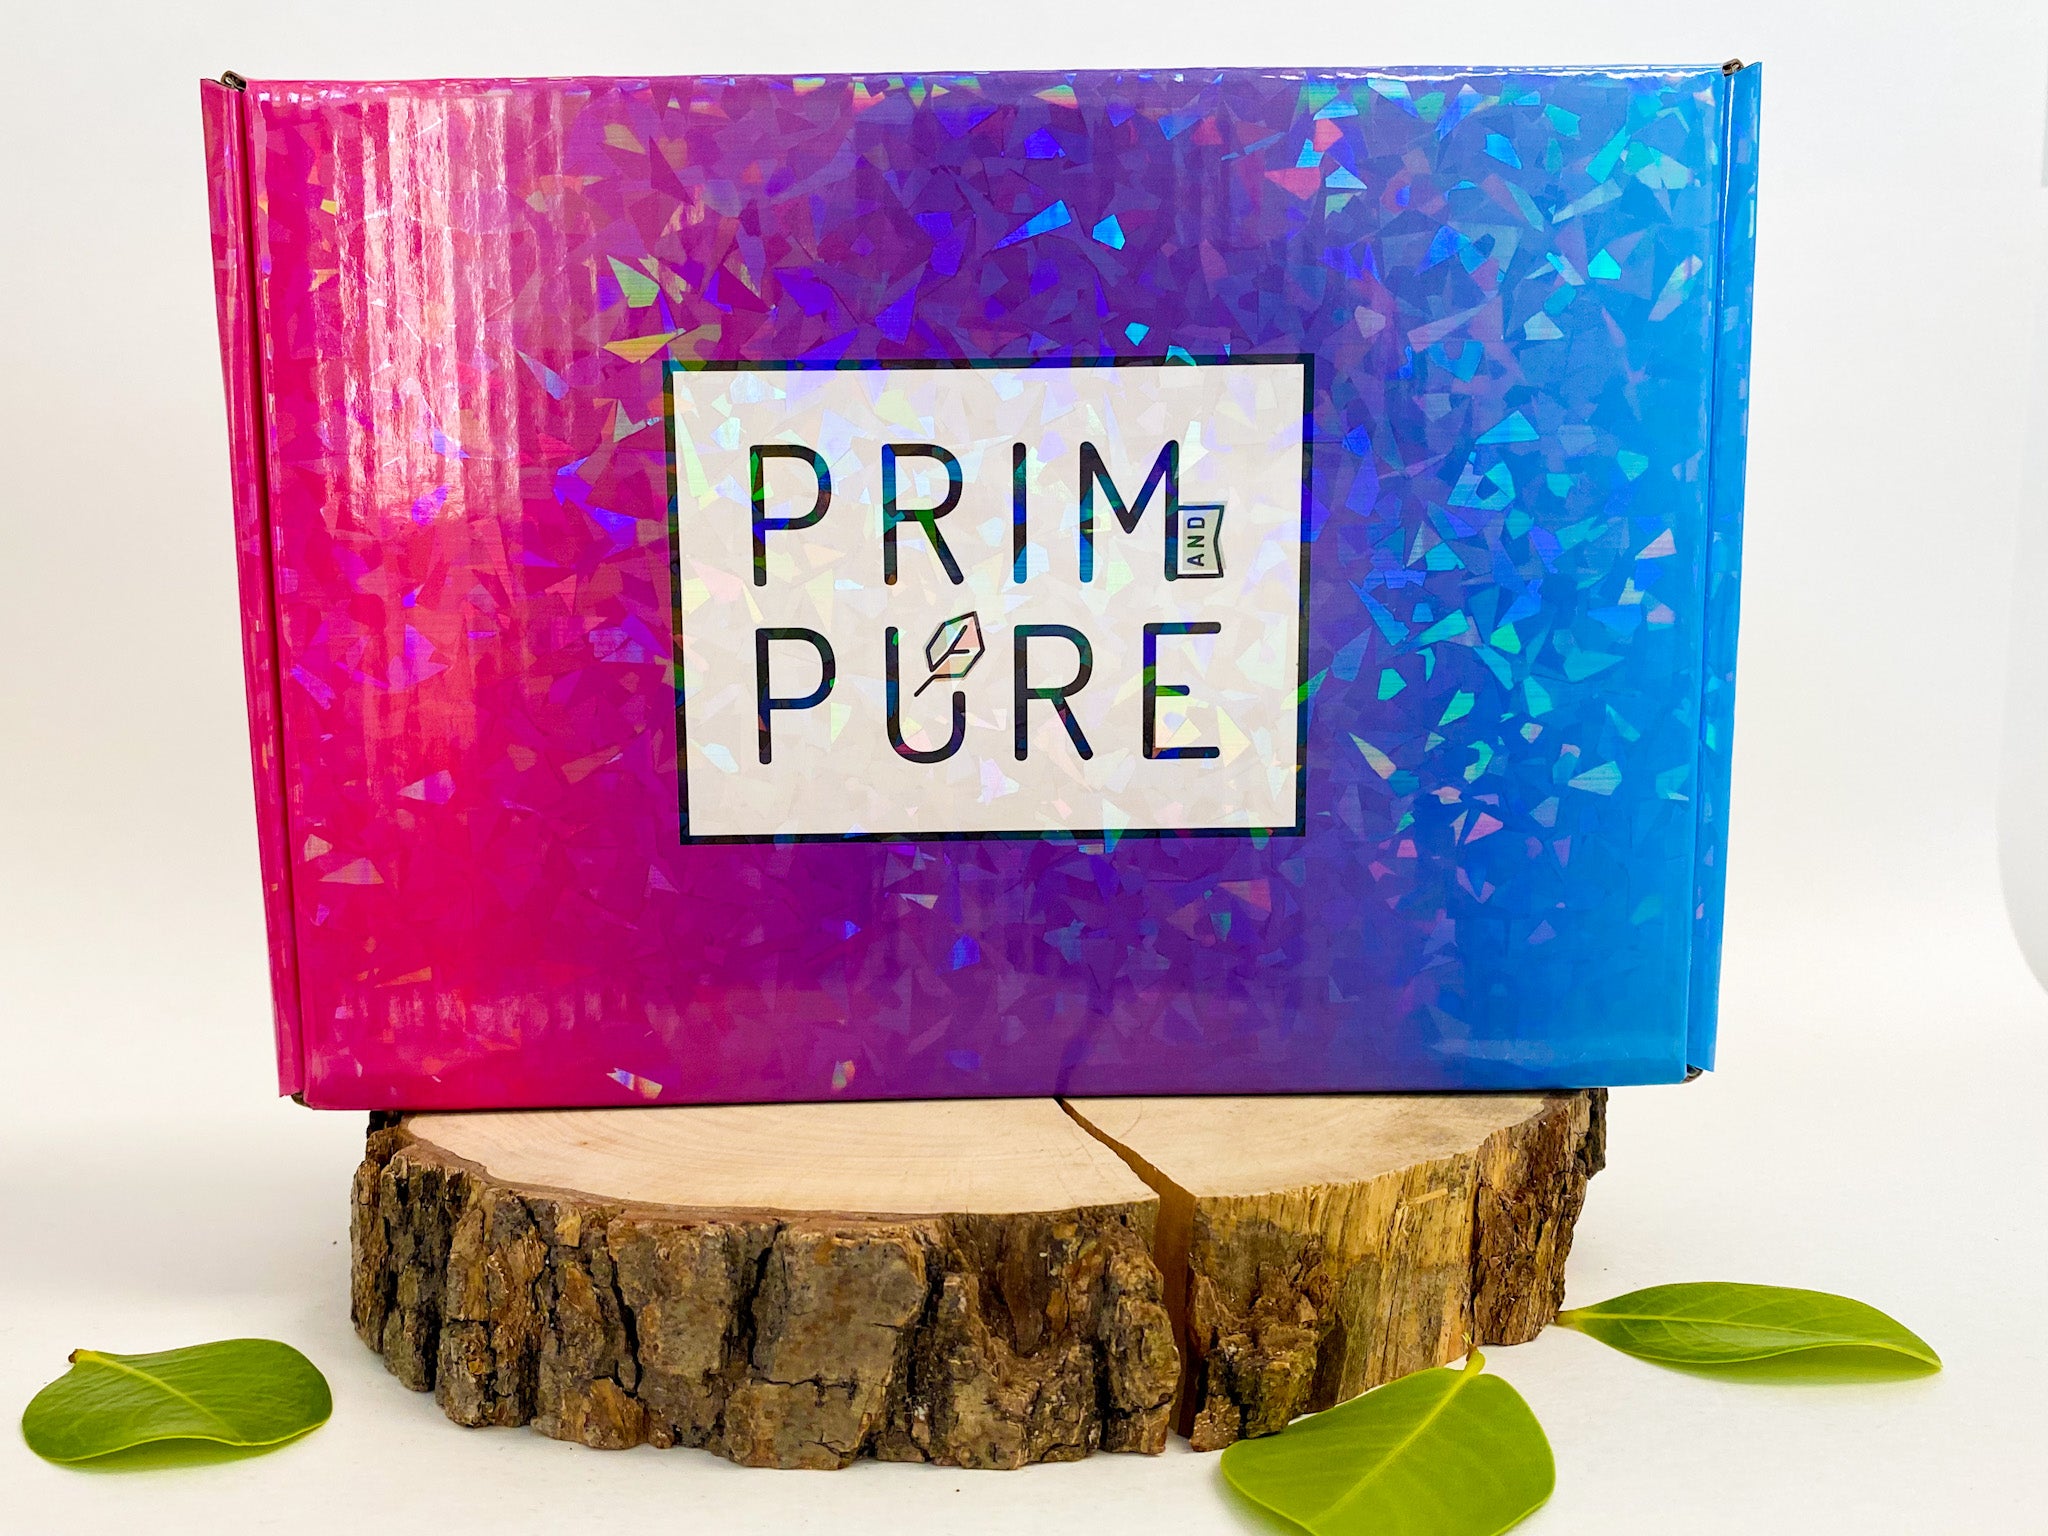 Prim and Pure Mineral Gift Set with Unicorn Mirror Perfect for Play Dates & Birthday Parties Kids Eyeshadow Makeup - Mineral Blush Organic & Natural